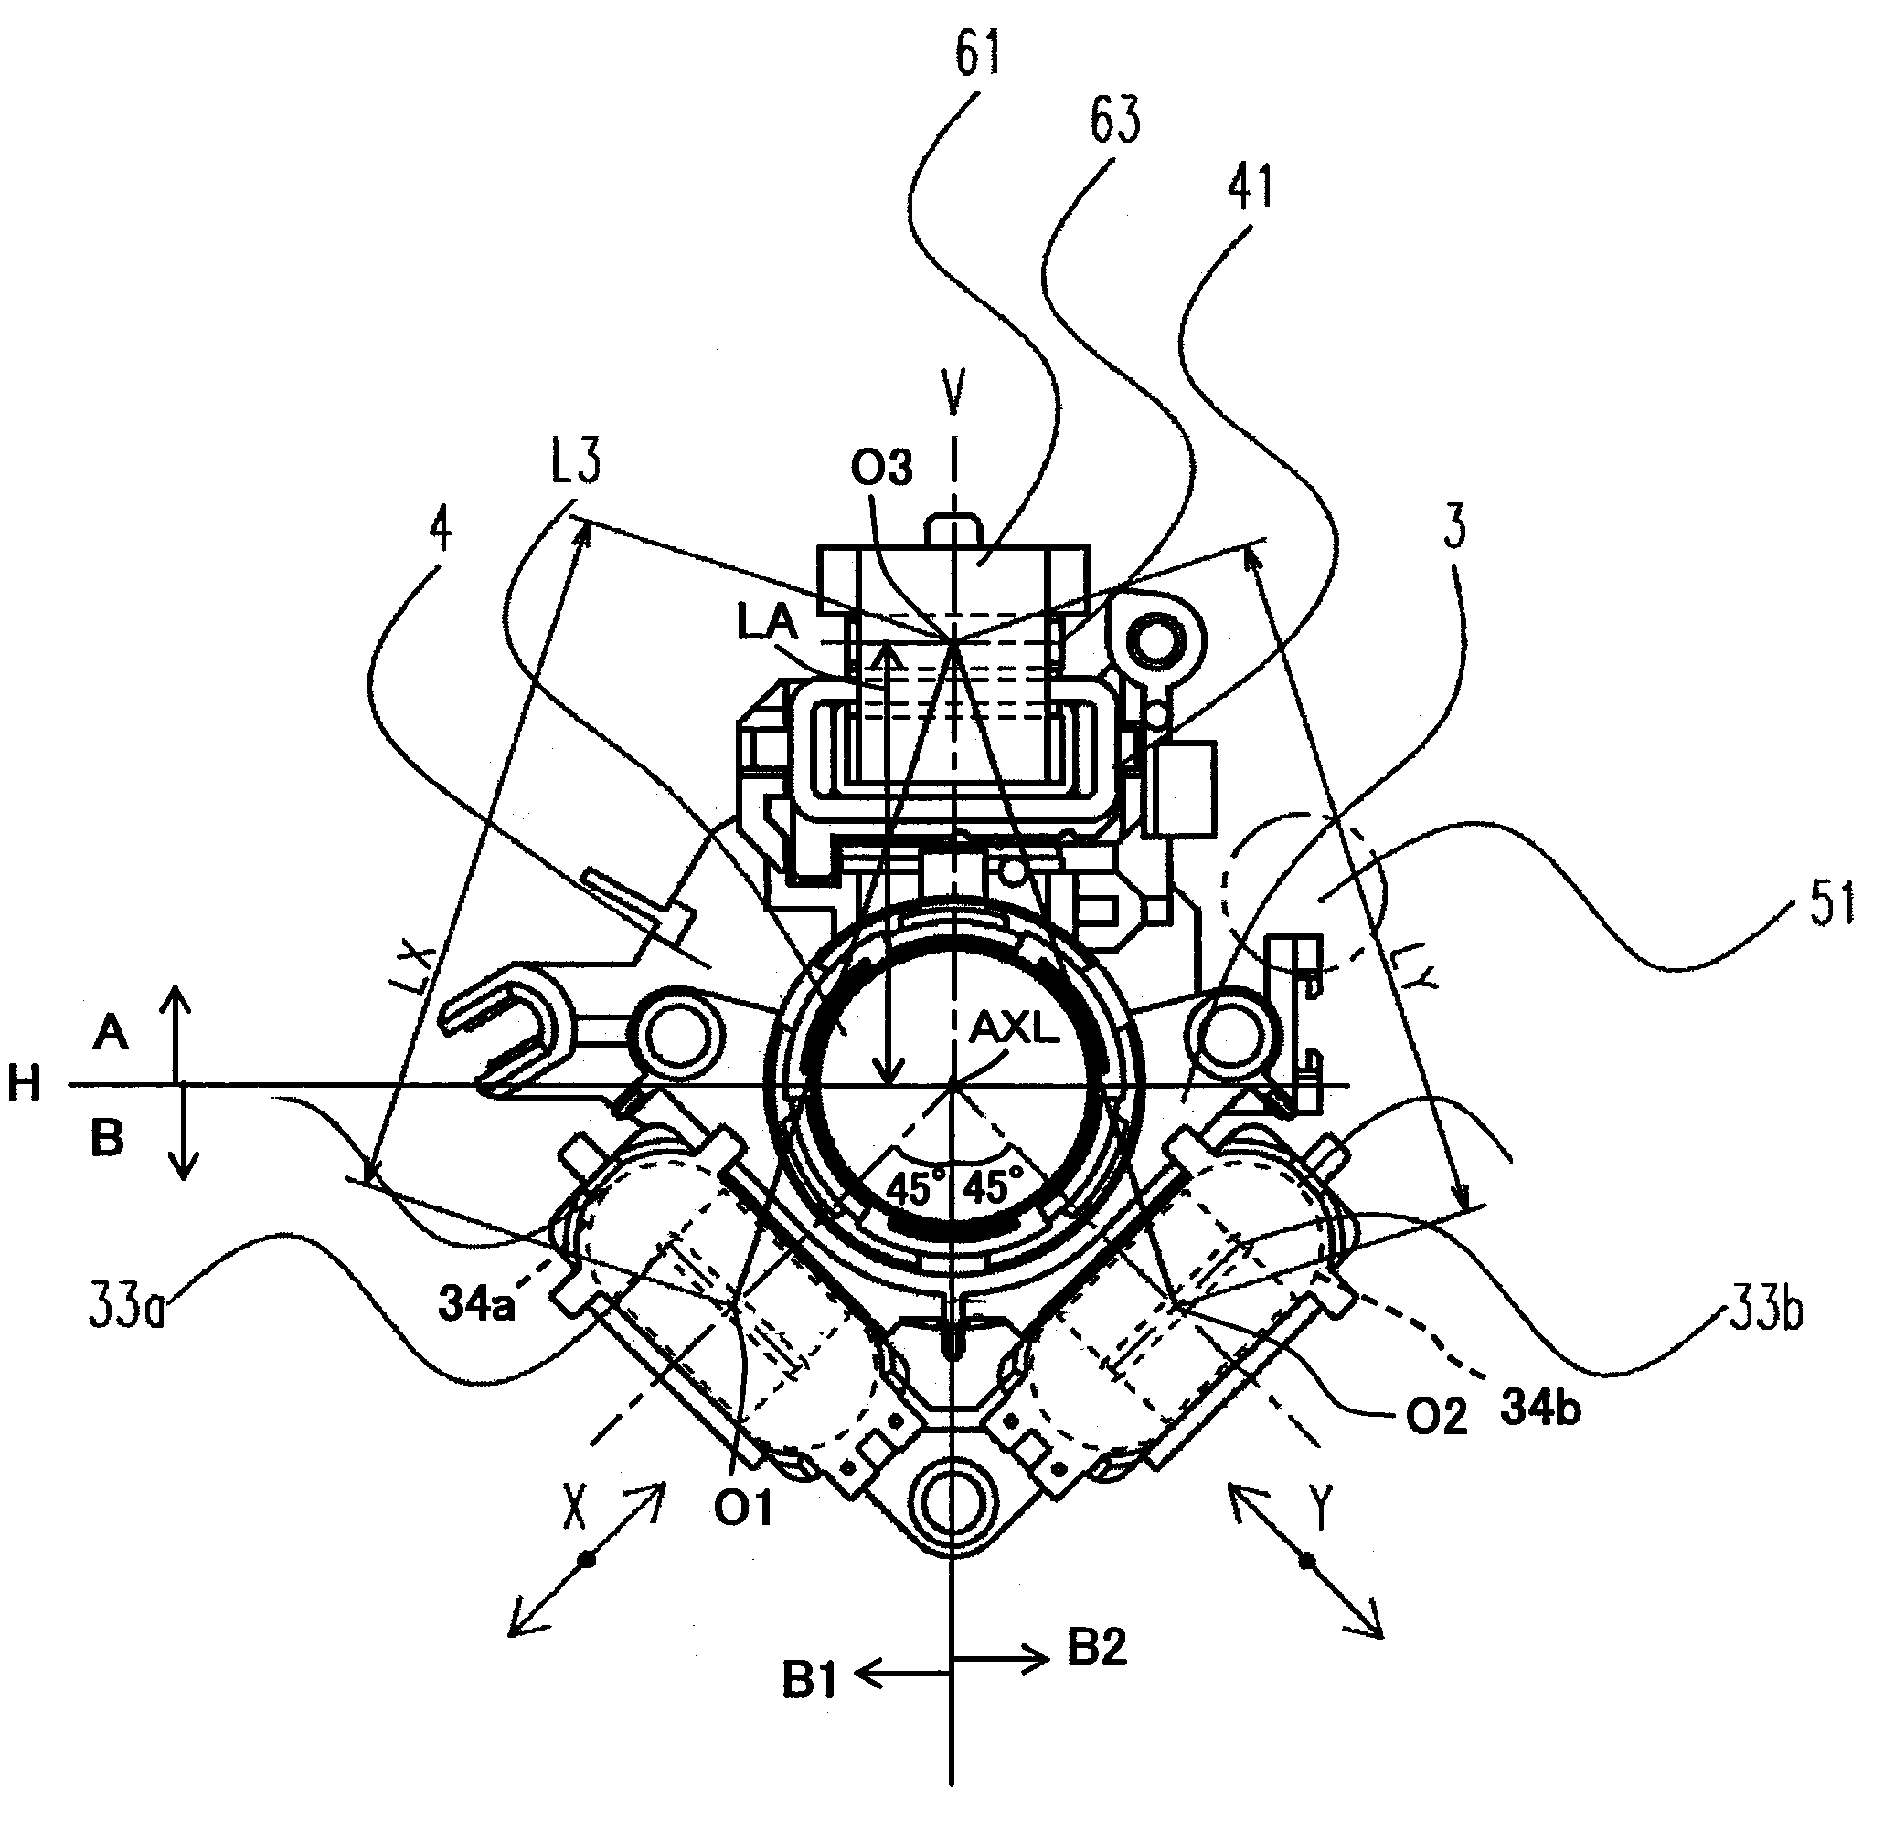 Optical apparatus with image stabilizing and movable lenses and actuators for shifting and/or moving the lenses